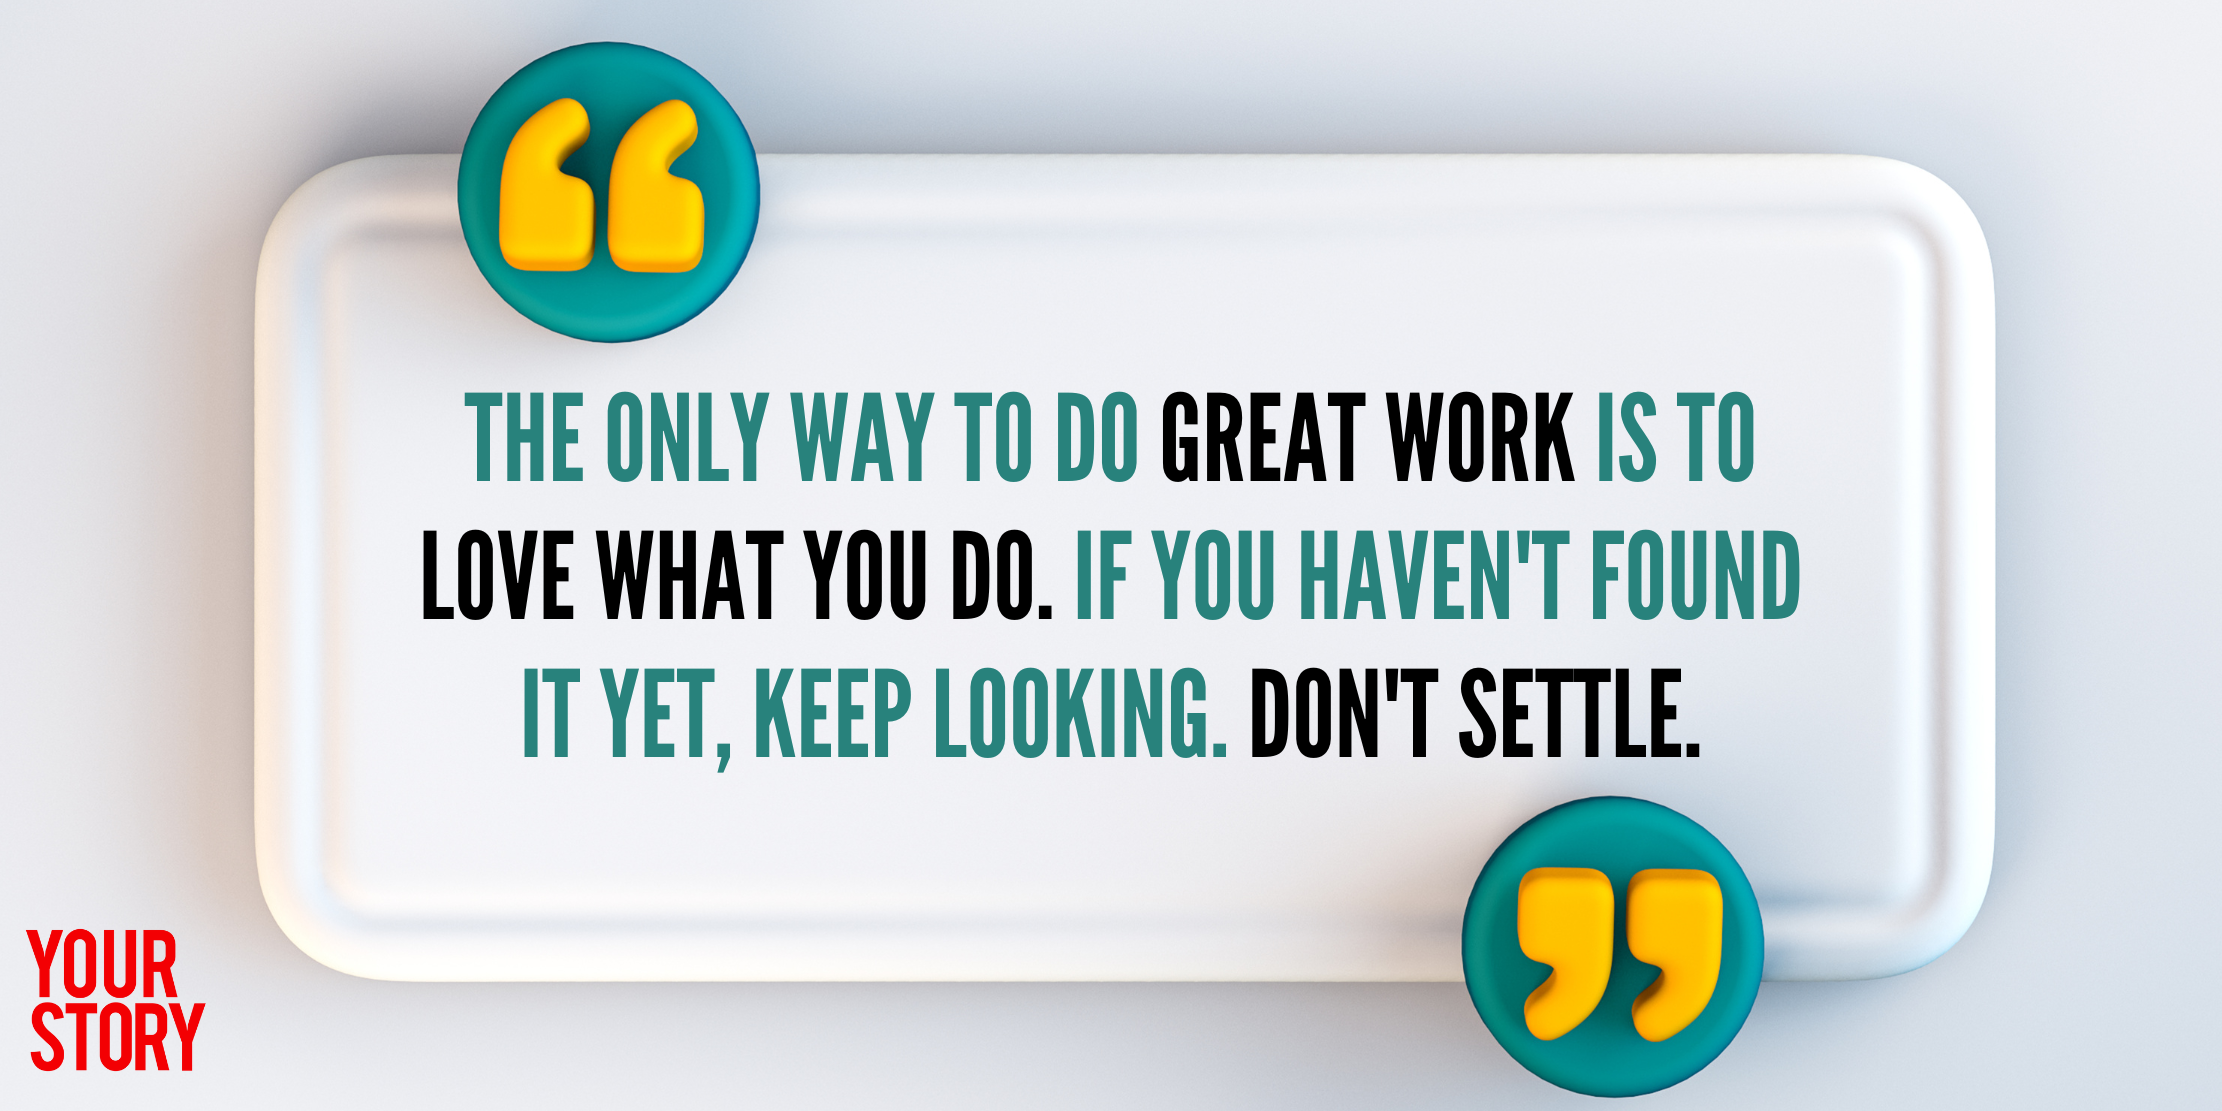 ⁠⁠The Only Way To Do Great Work Is To Love What You Do. If You Haven't Found It Yet, Keep Looking. Don't Settle.